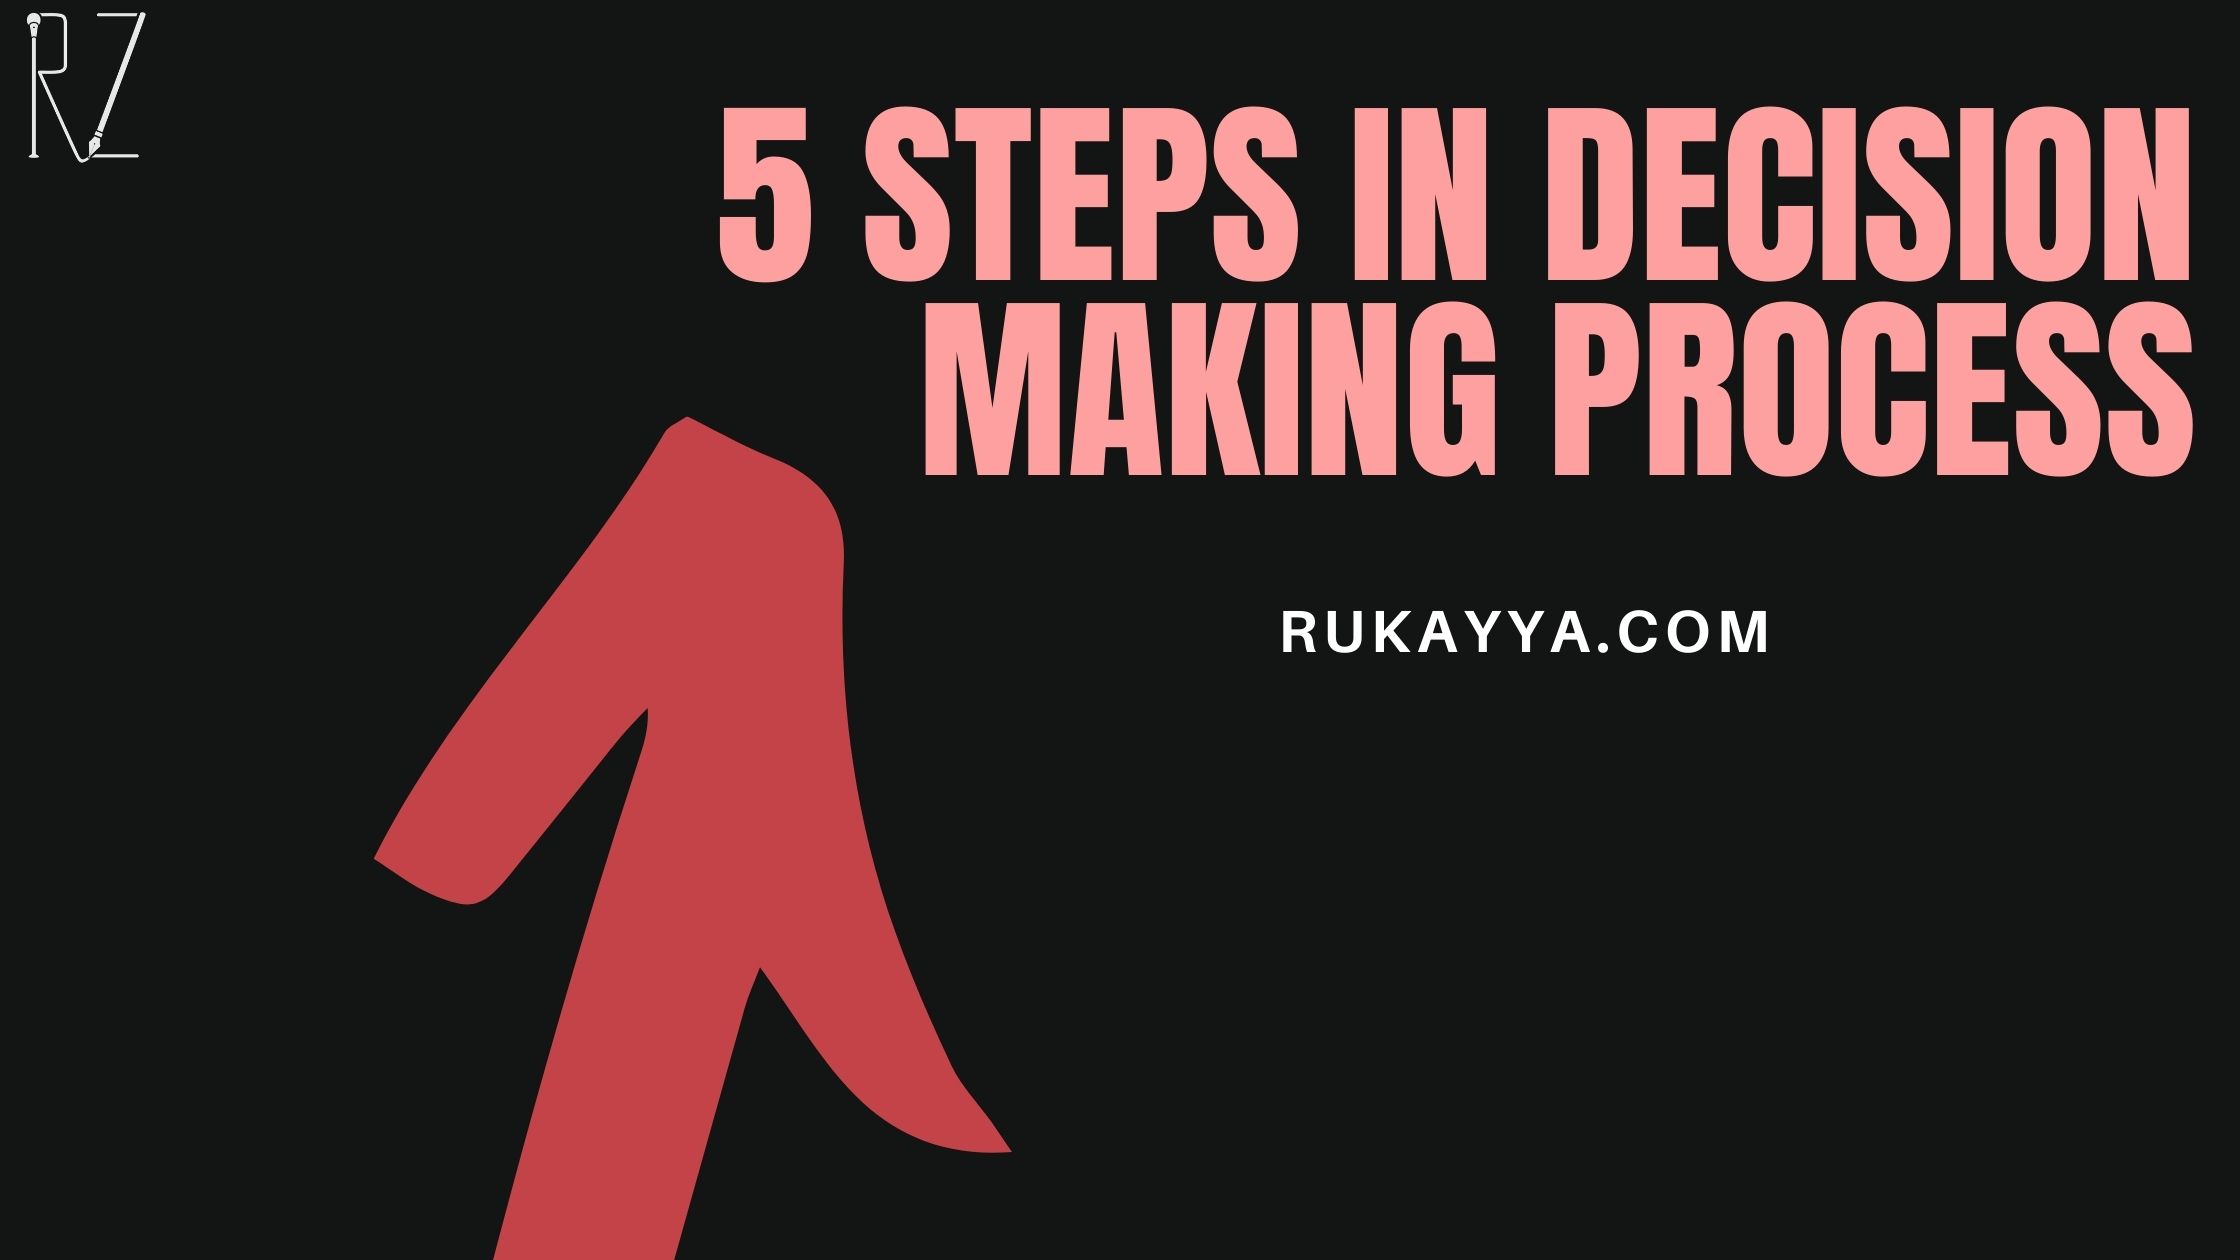 5 steps in decision making process, how to take decisions